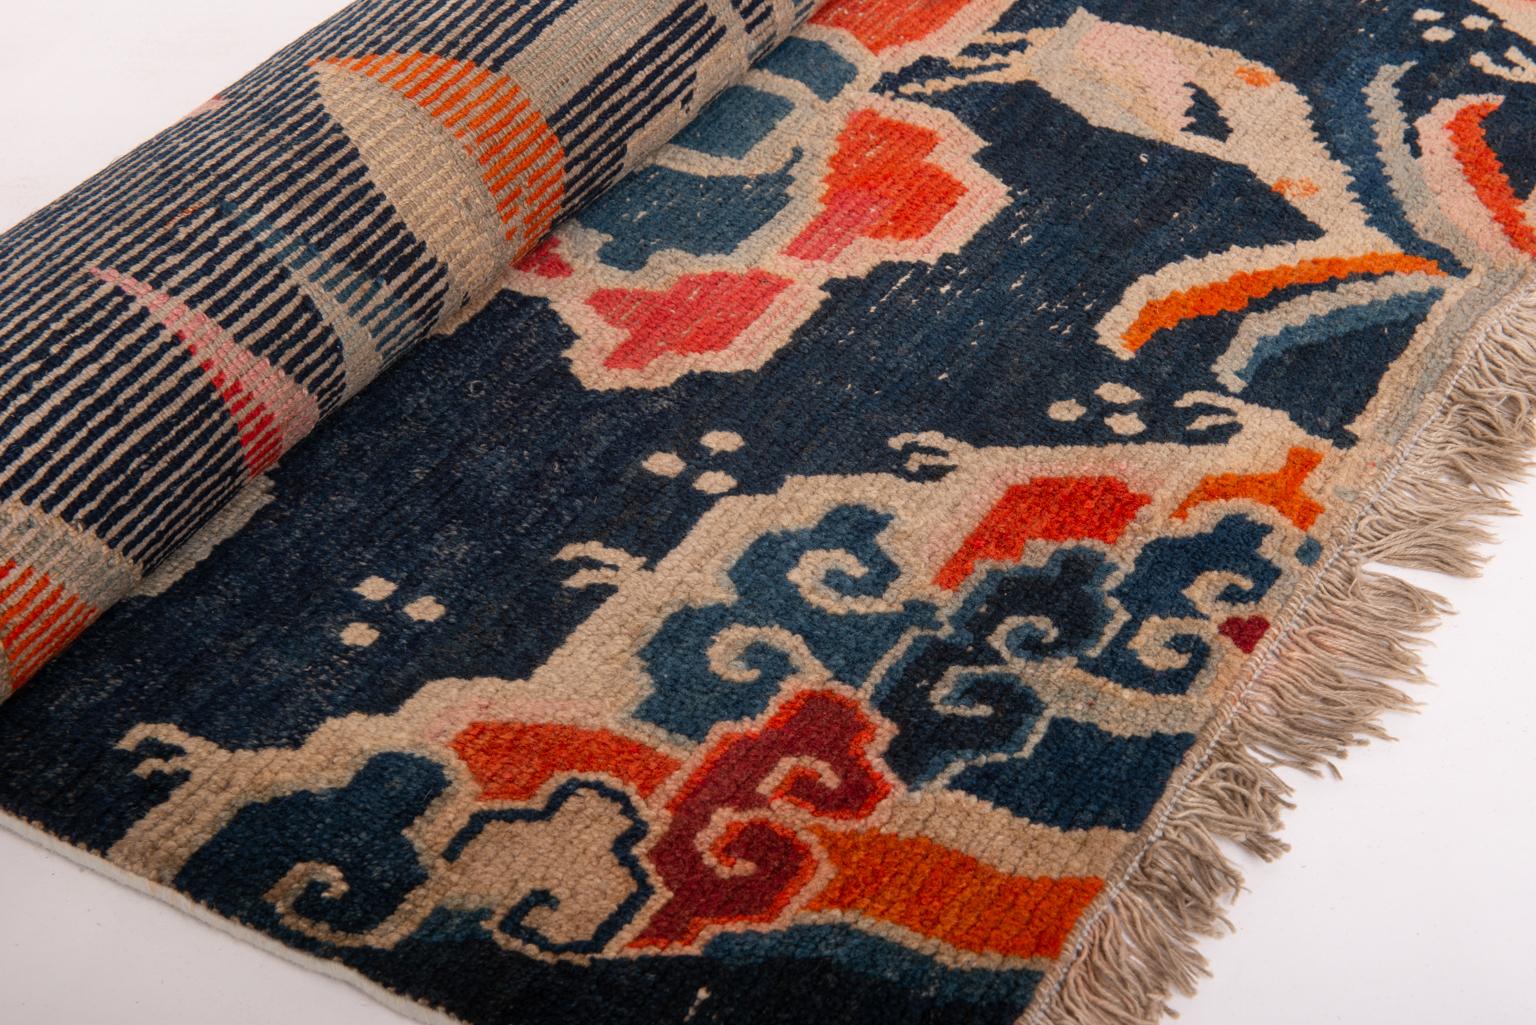 Tibetan Antique Carpet from Private Collection 6